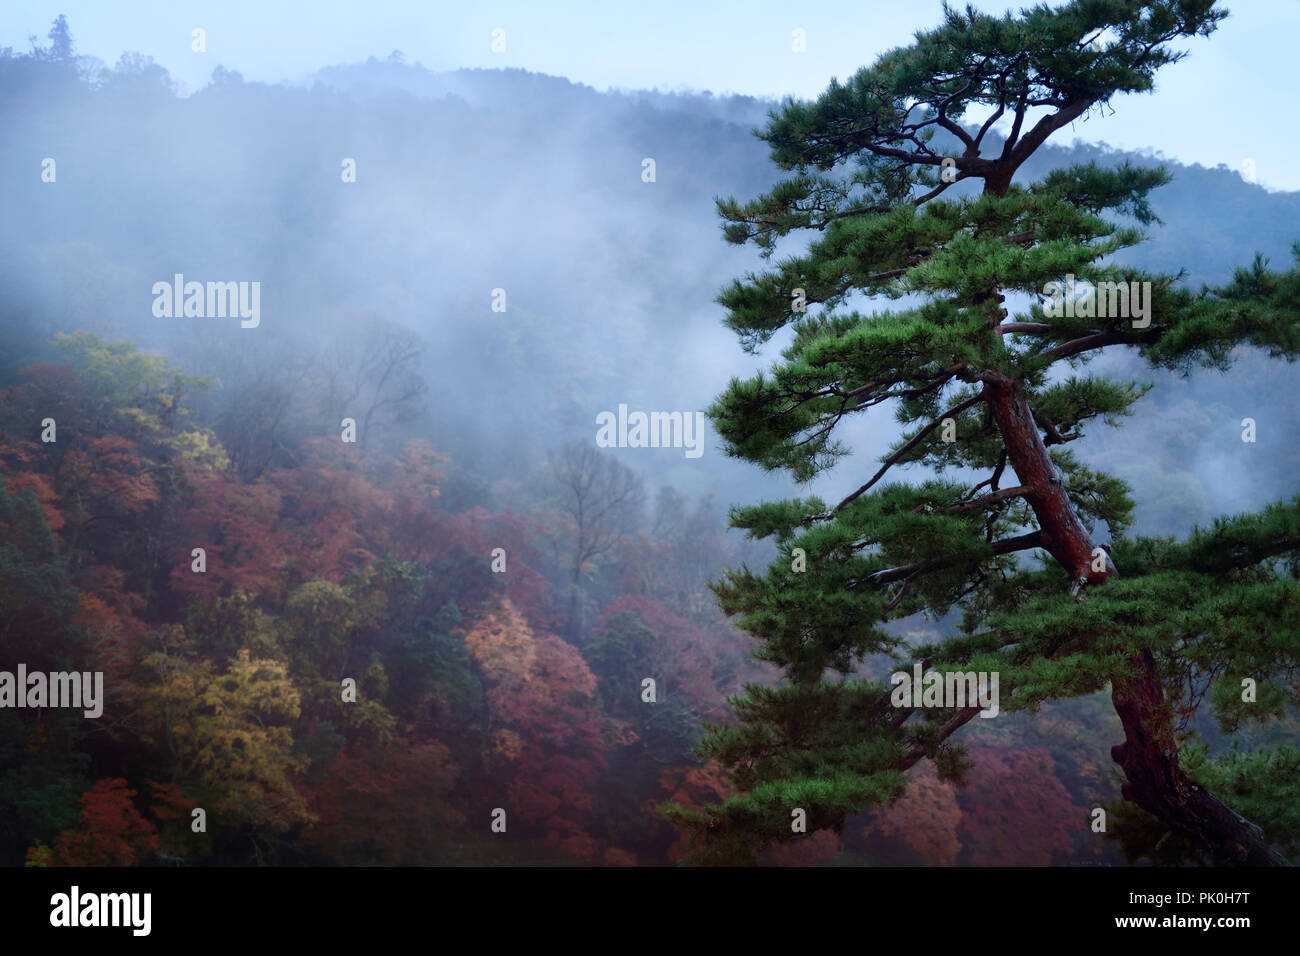 Beautiful old Japanese red pine tree, Pinus densiflora, in a foggy autumn morning scenery with Arashiyama mountain in the background, Kyoto, Japan. Stock Photo